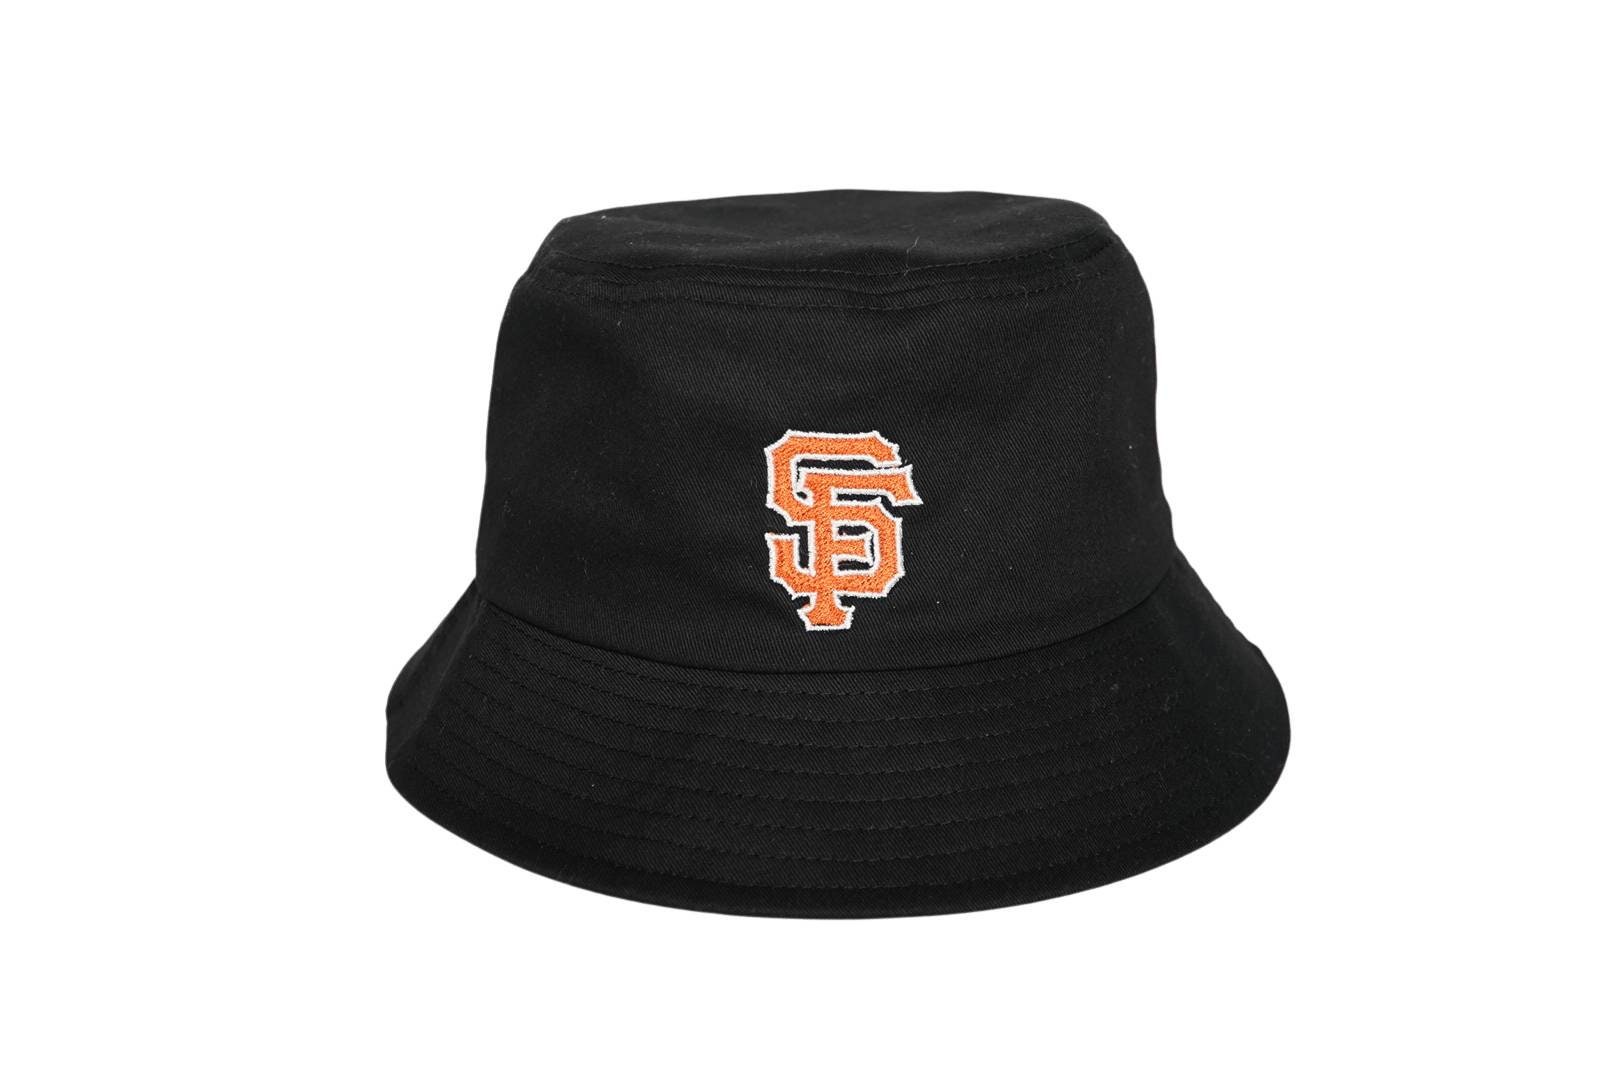 San Diego Padres Bucket Hat, Reversible to Solid Brown, Sizes S